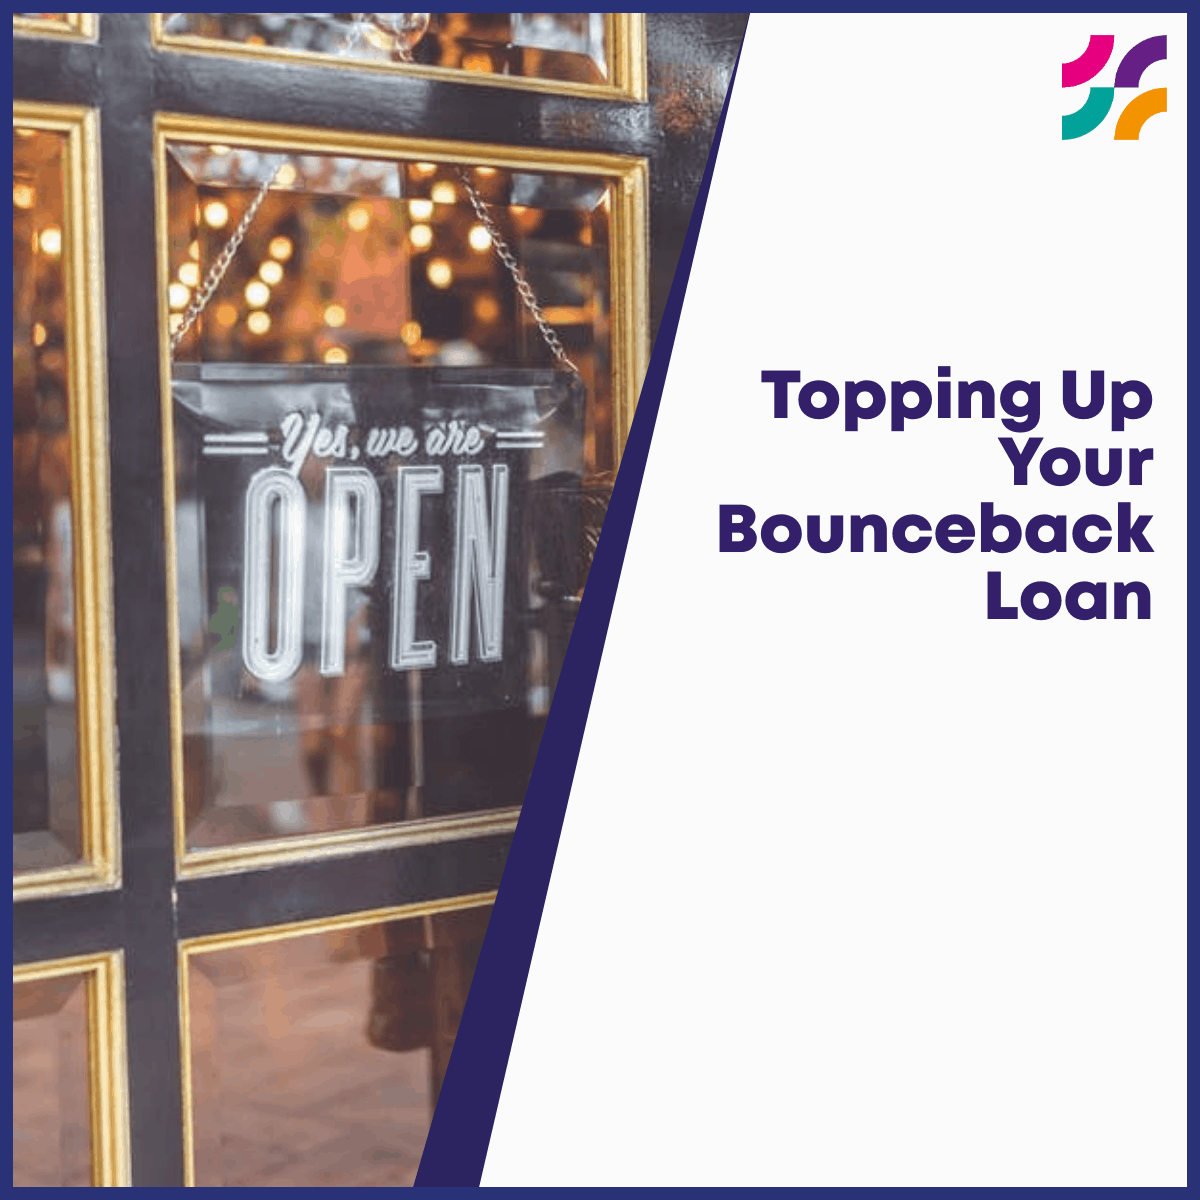 Topping Up Your Bounceback Loan